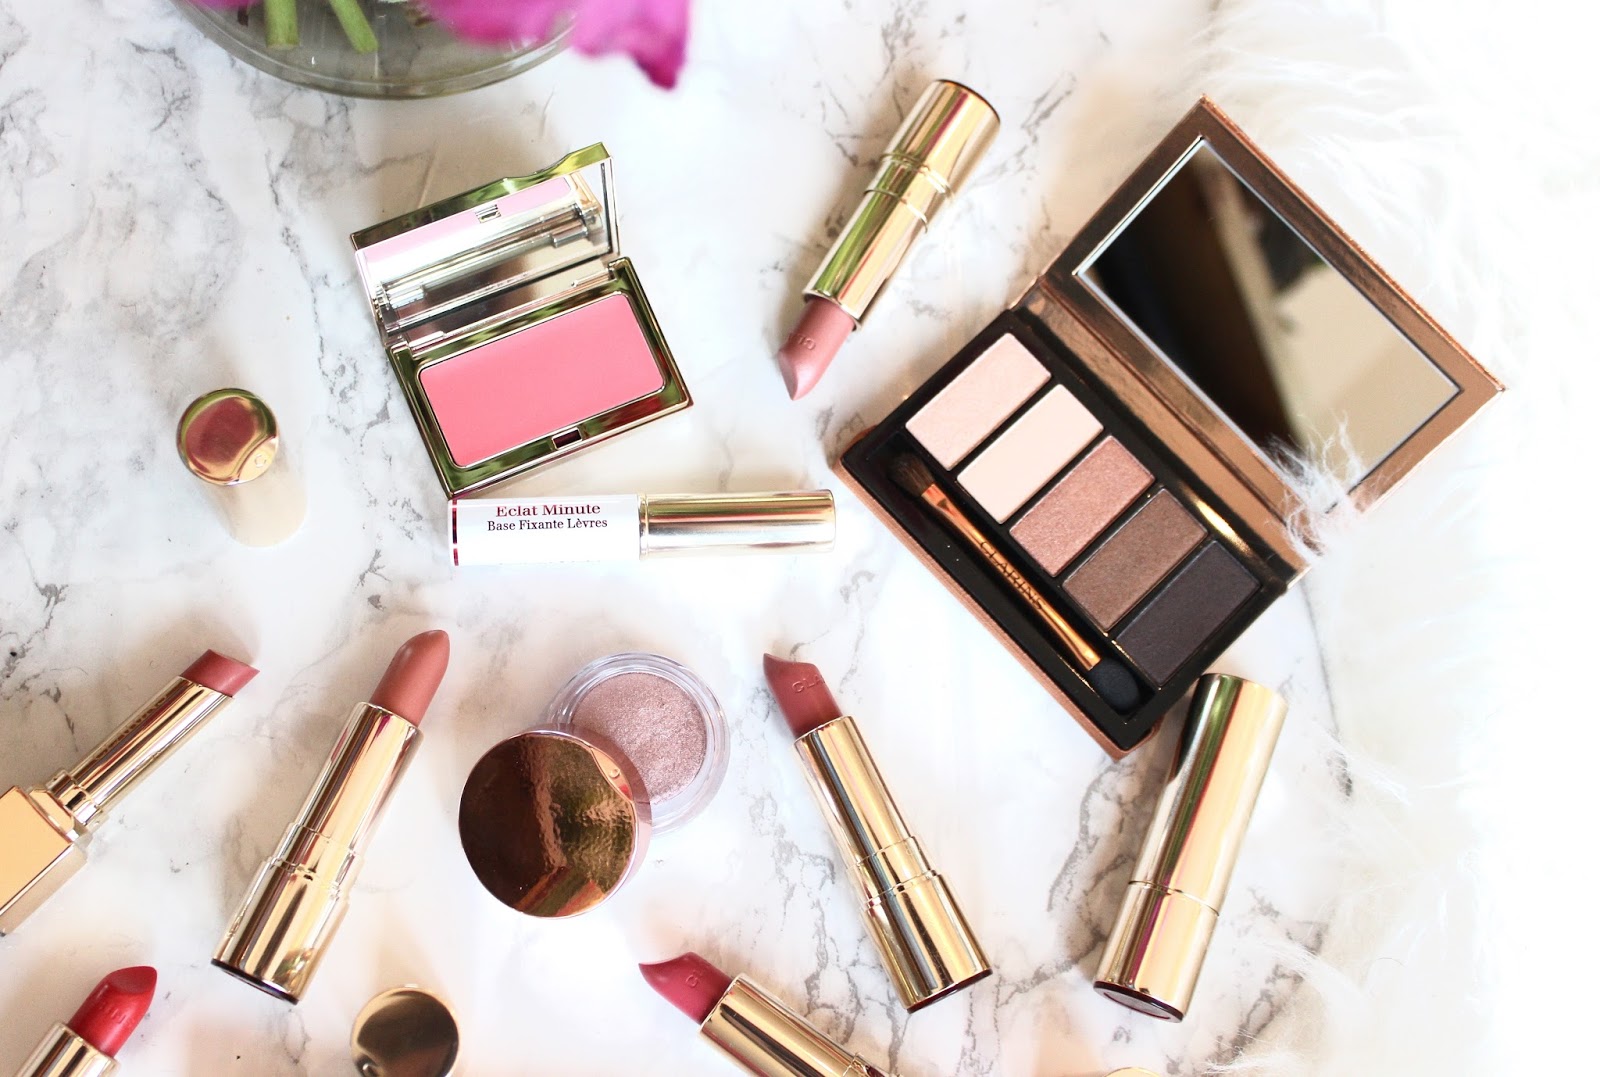 Clarins Spring Collection